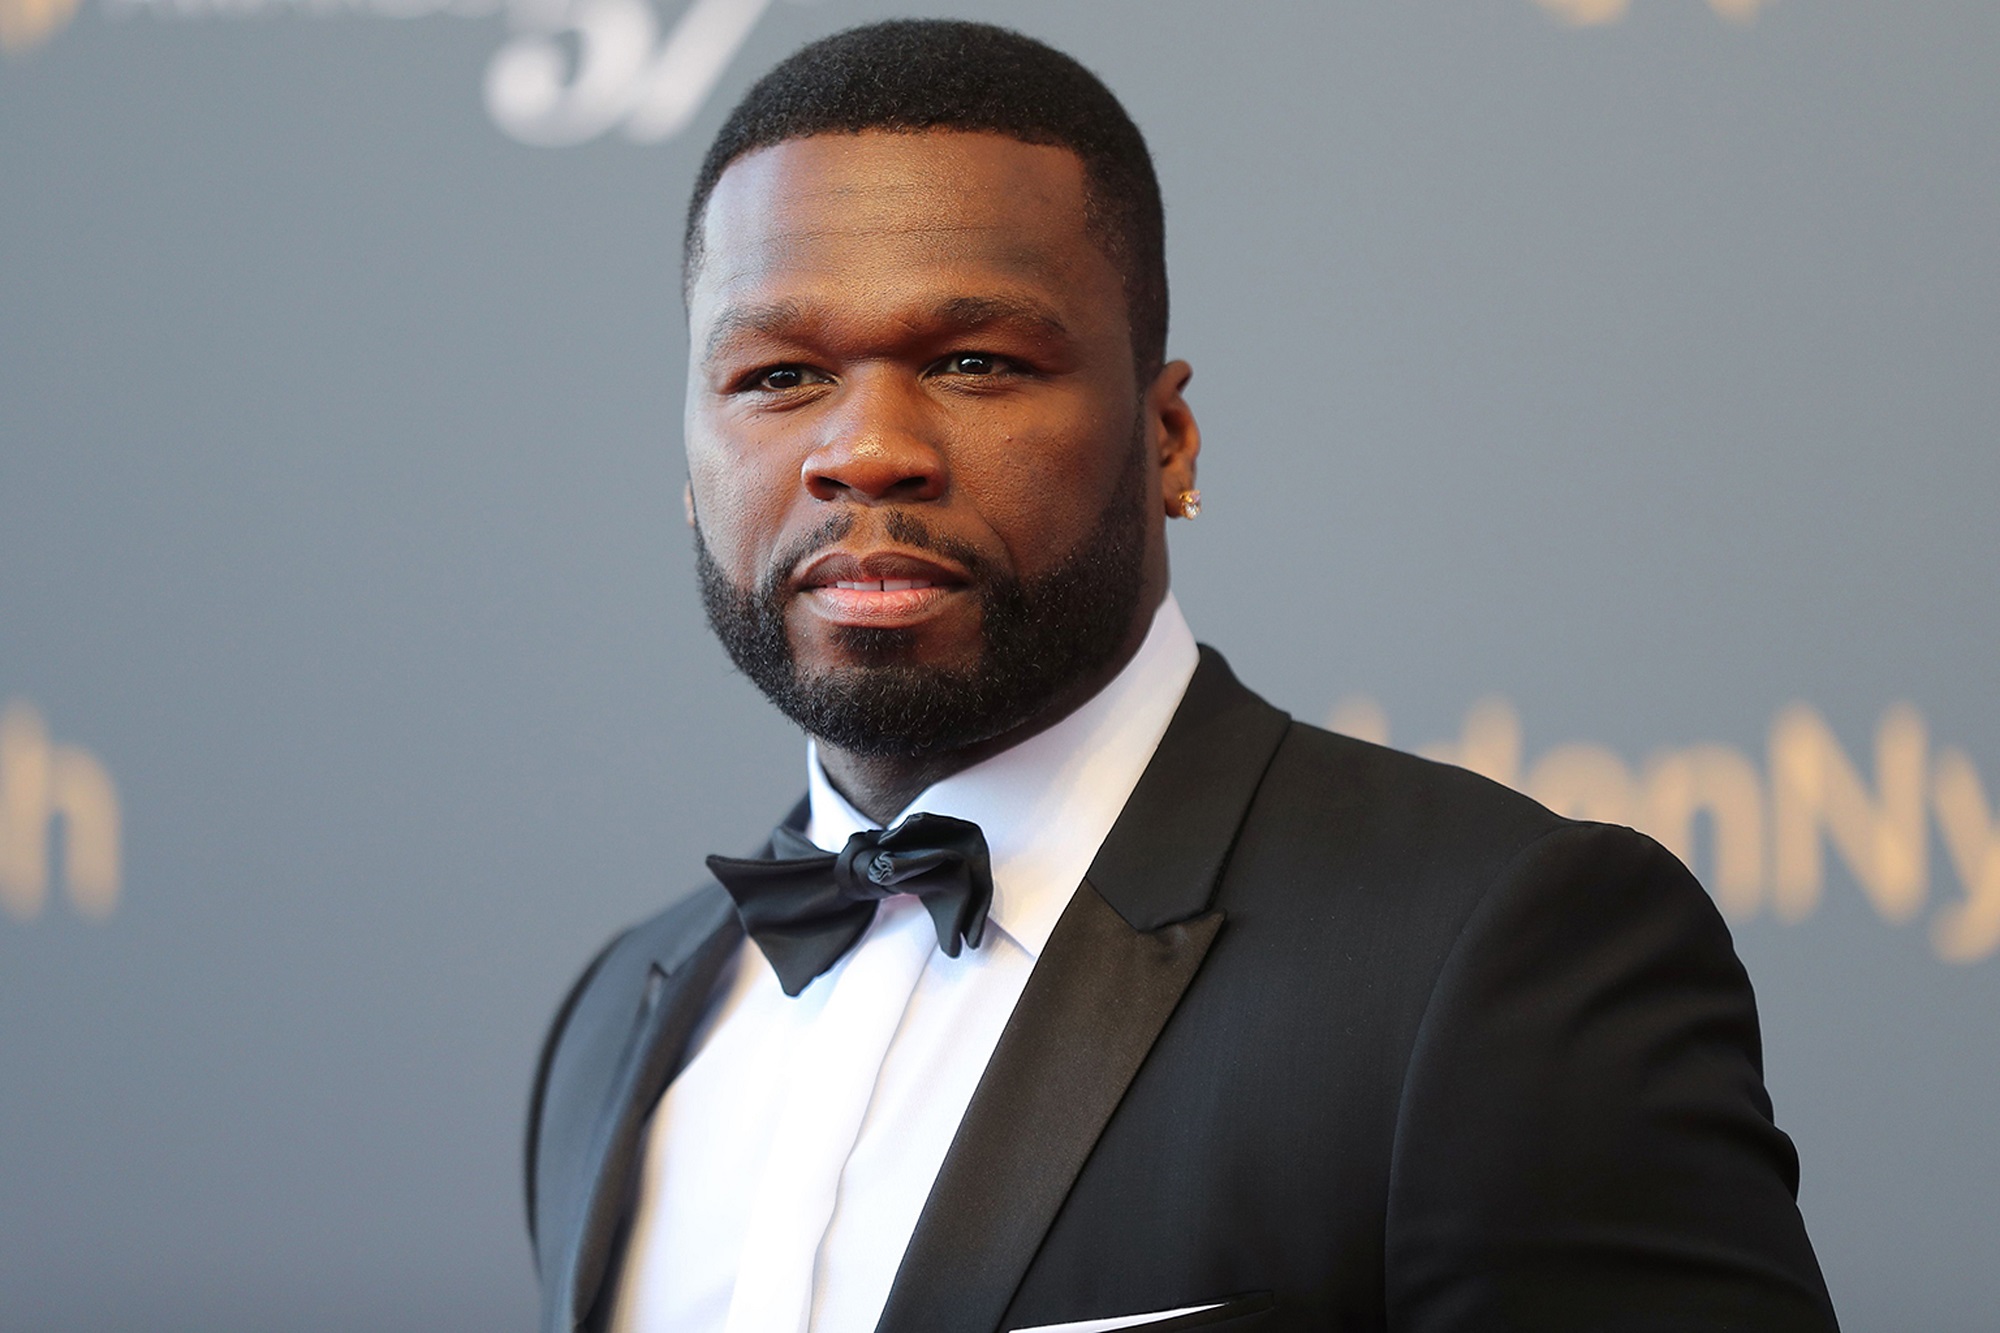 50 Cent Takes Shots at Mike Pence For not Wearing Mask During Clinic Visit